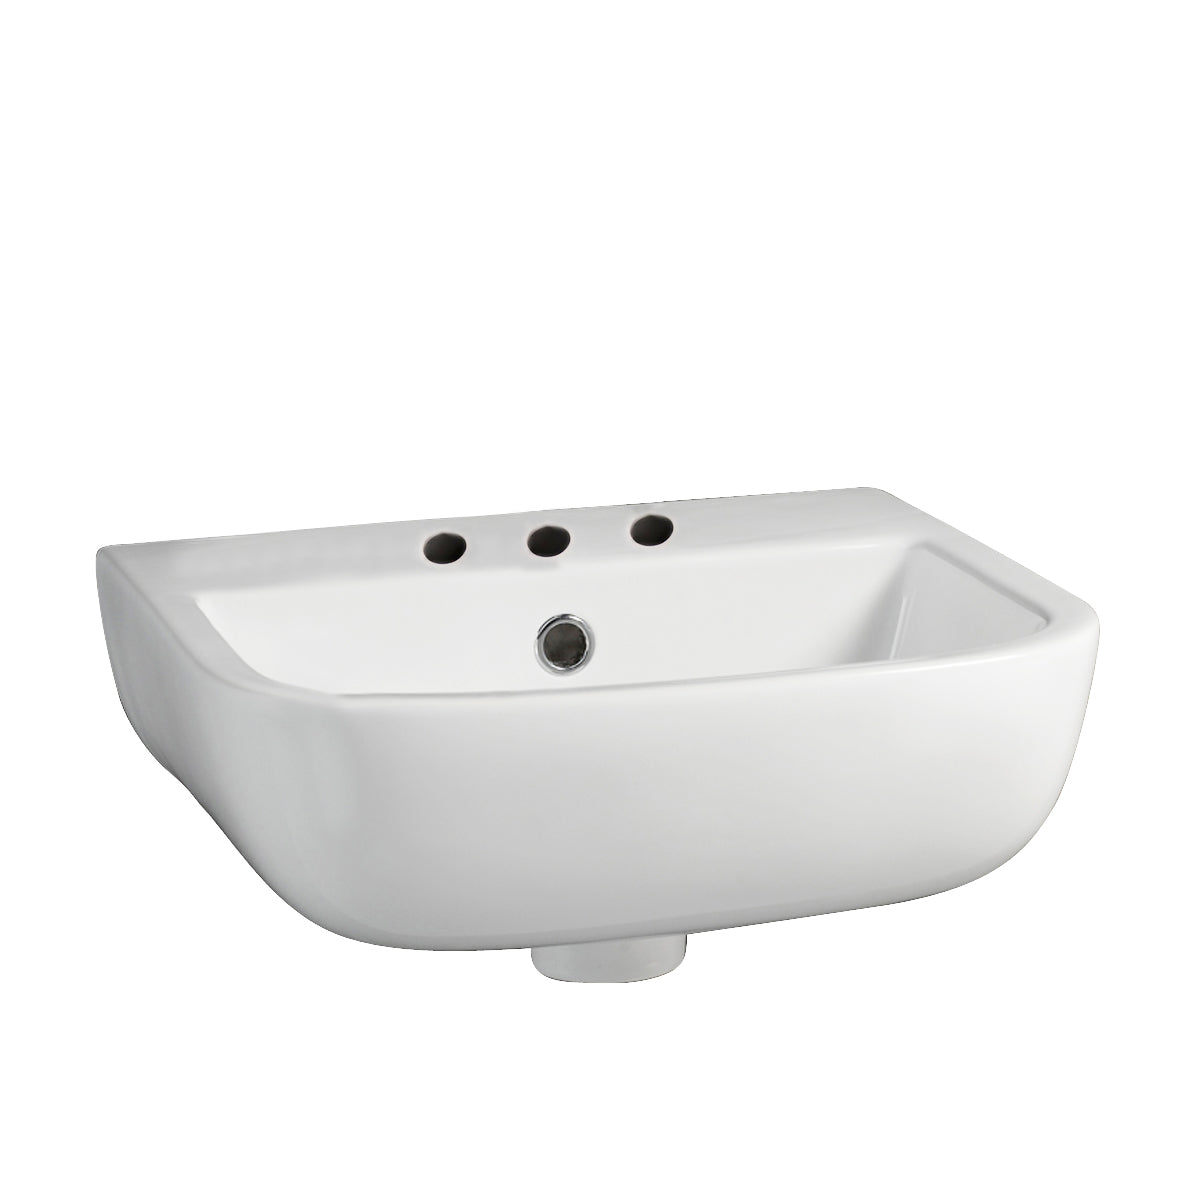 Series 600 Small Wall Hung Sink 15 3/4" for 8" Widespread White